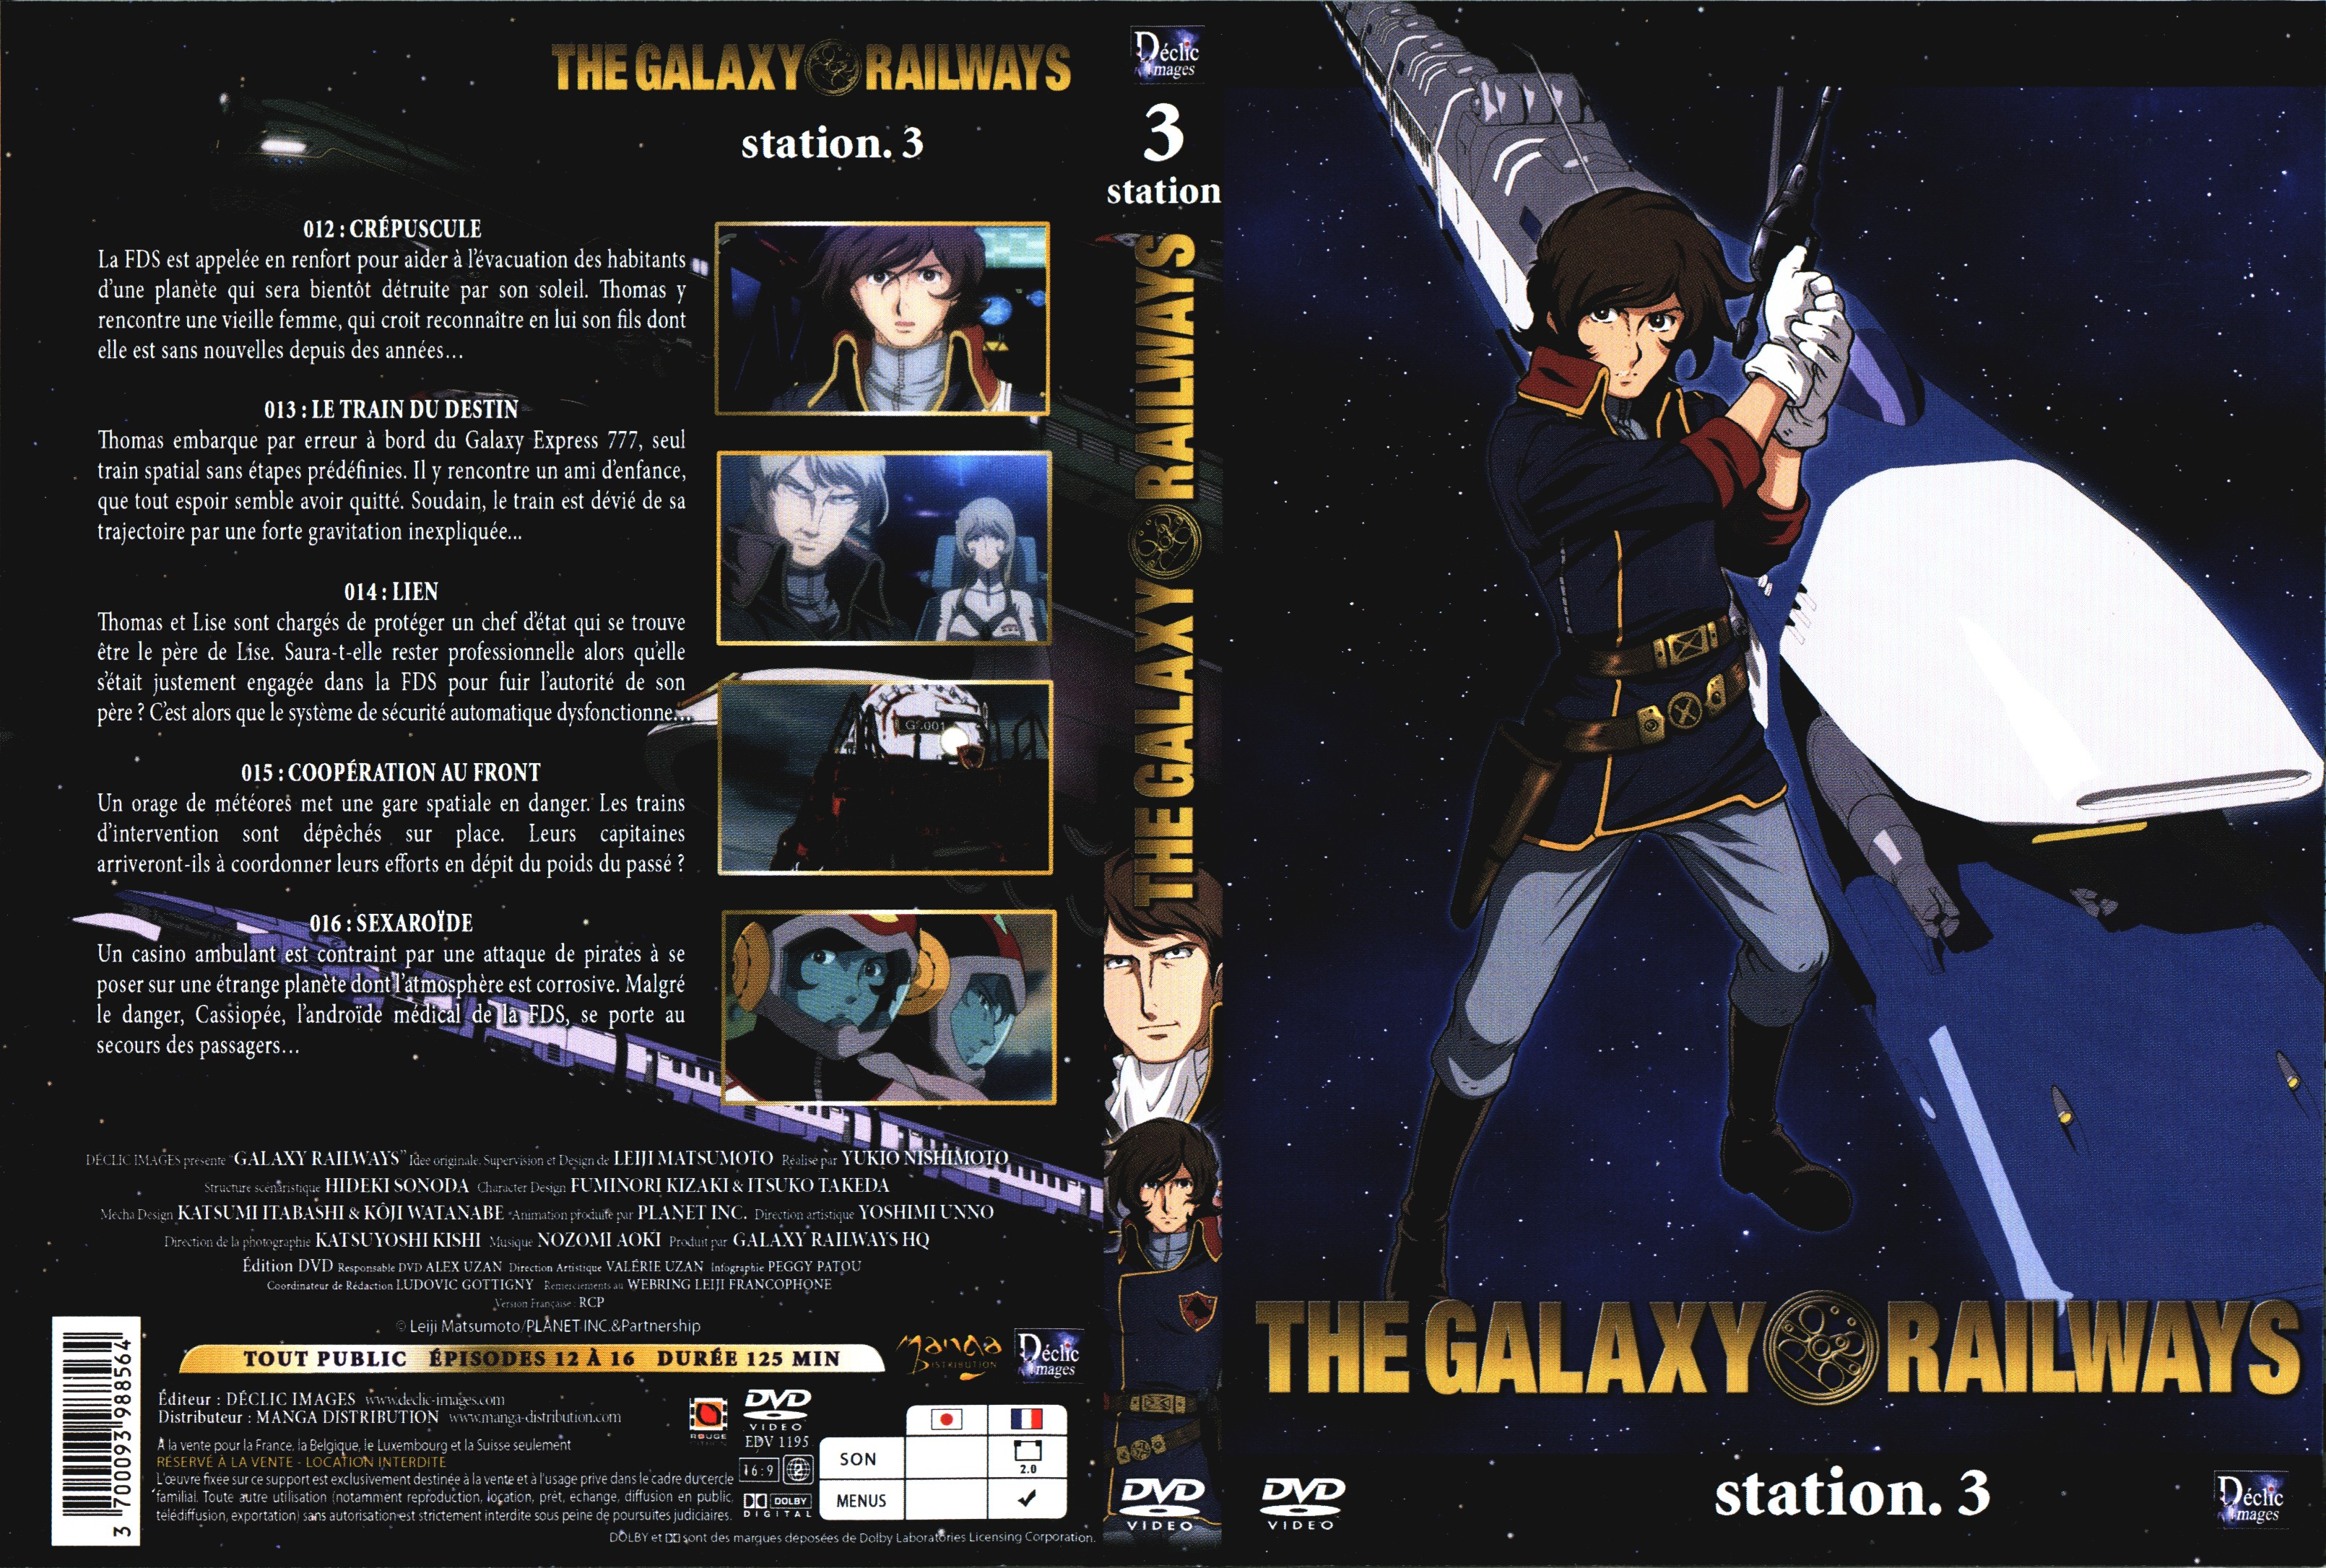 Jaquette DVD The galaxy railways station 3